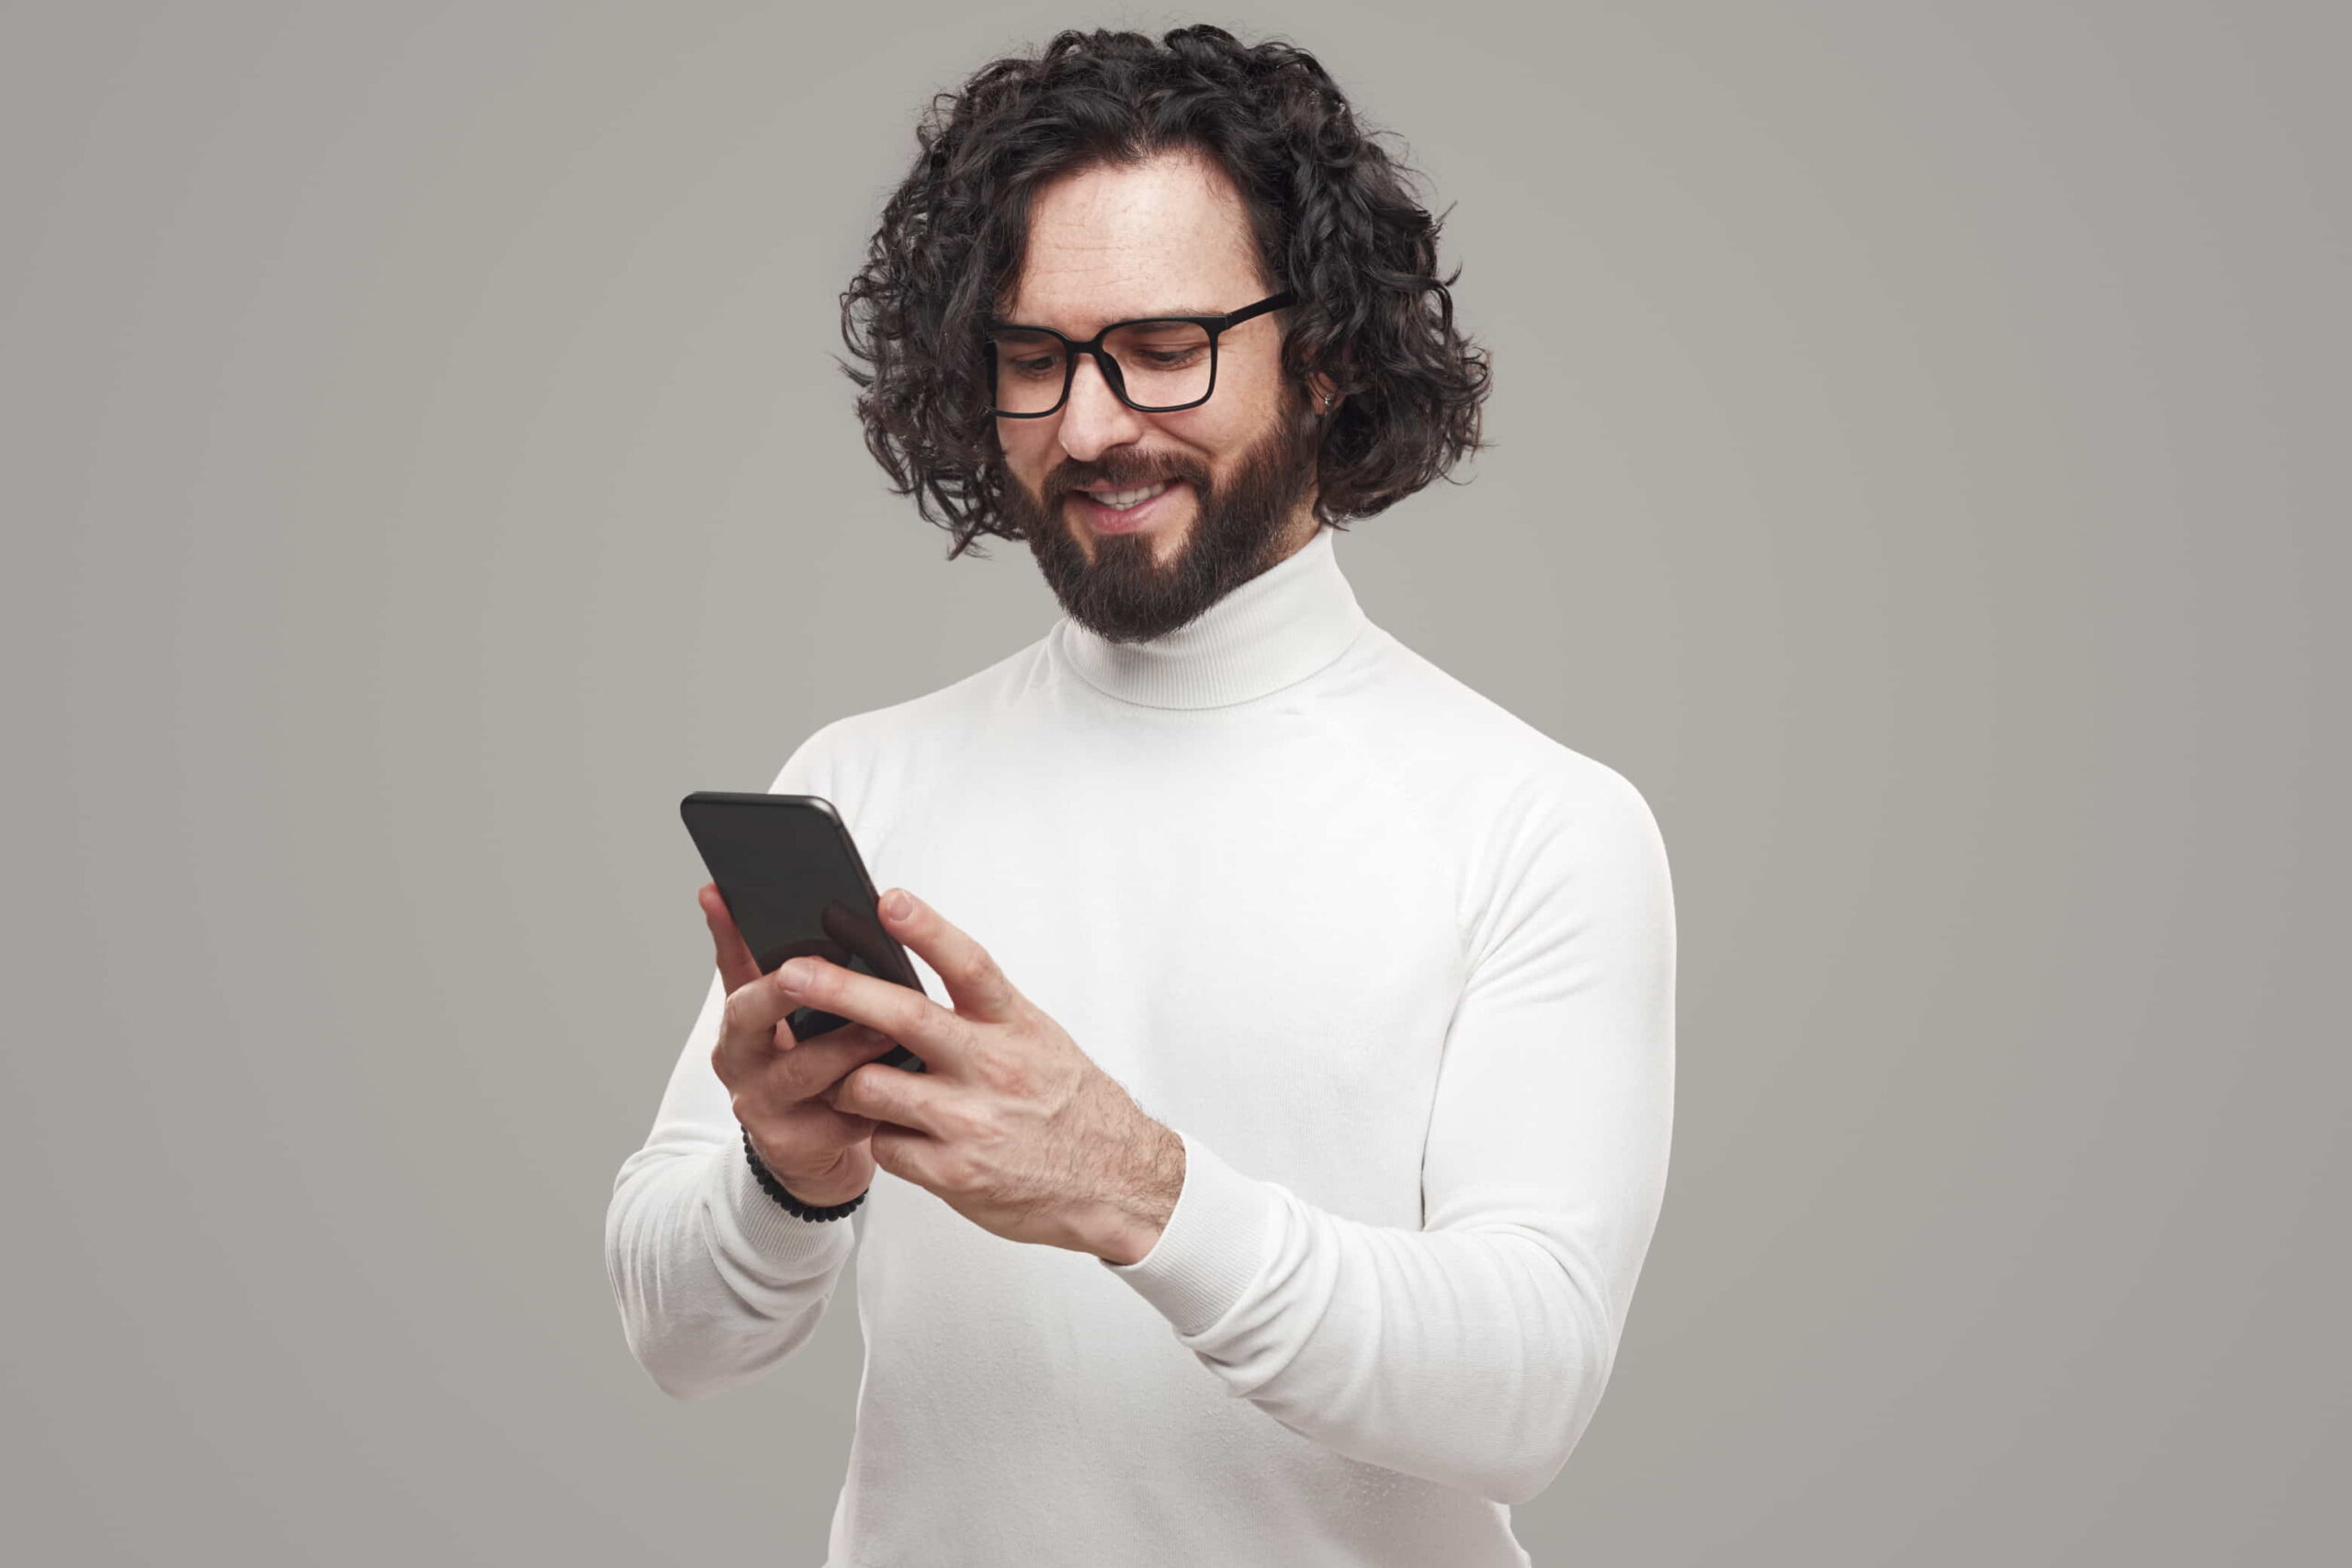 A long-haired man booking a barber shop appointment on his smartphone